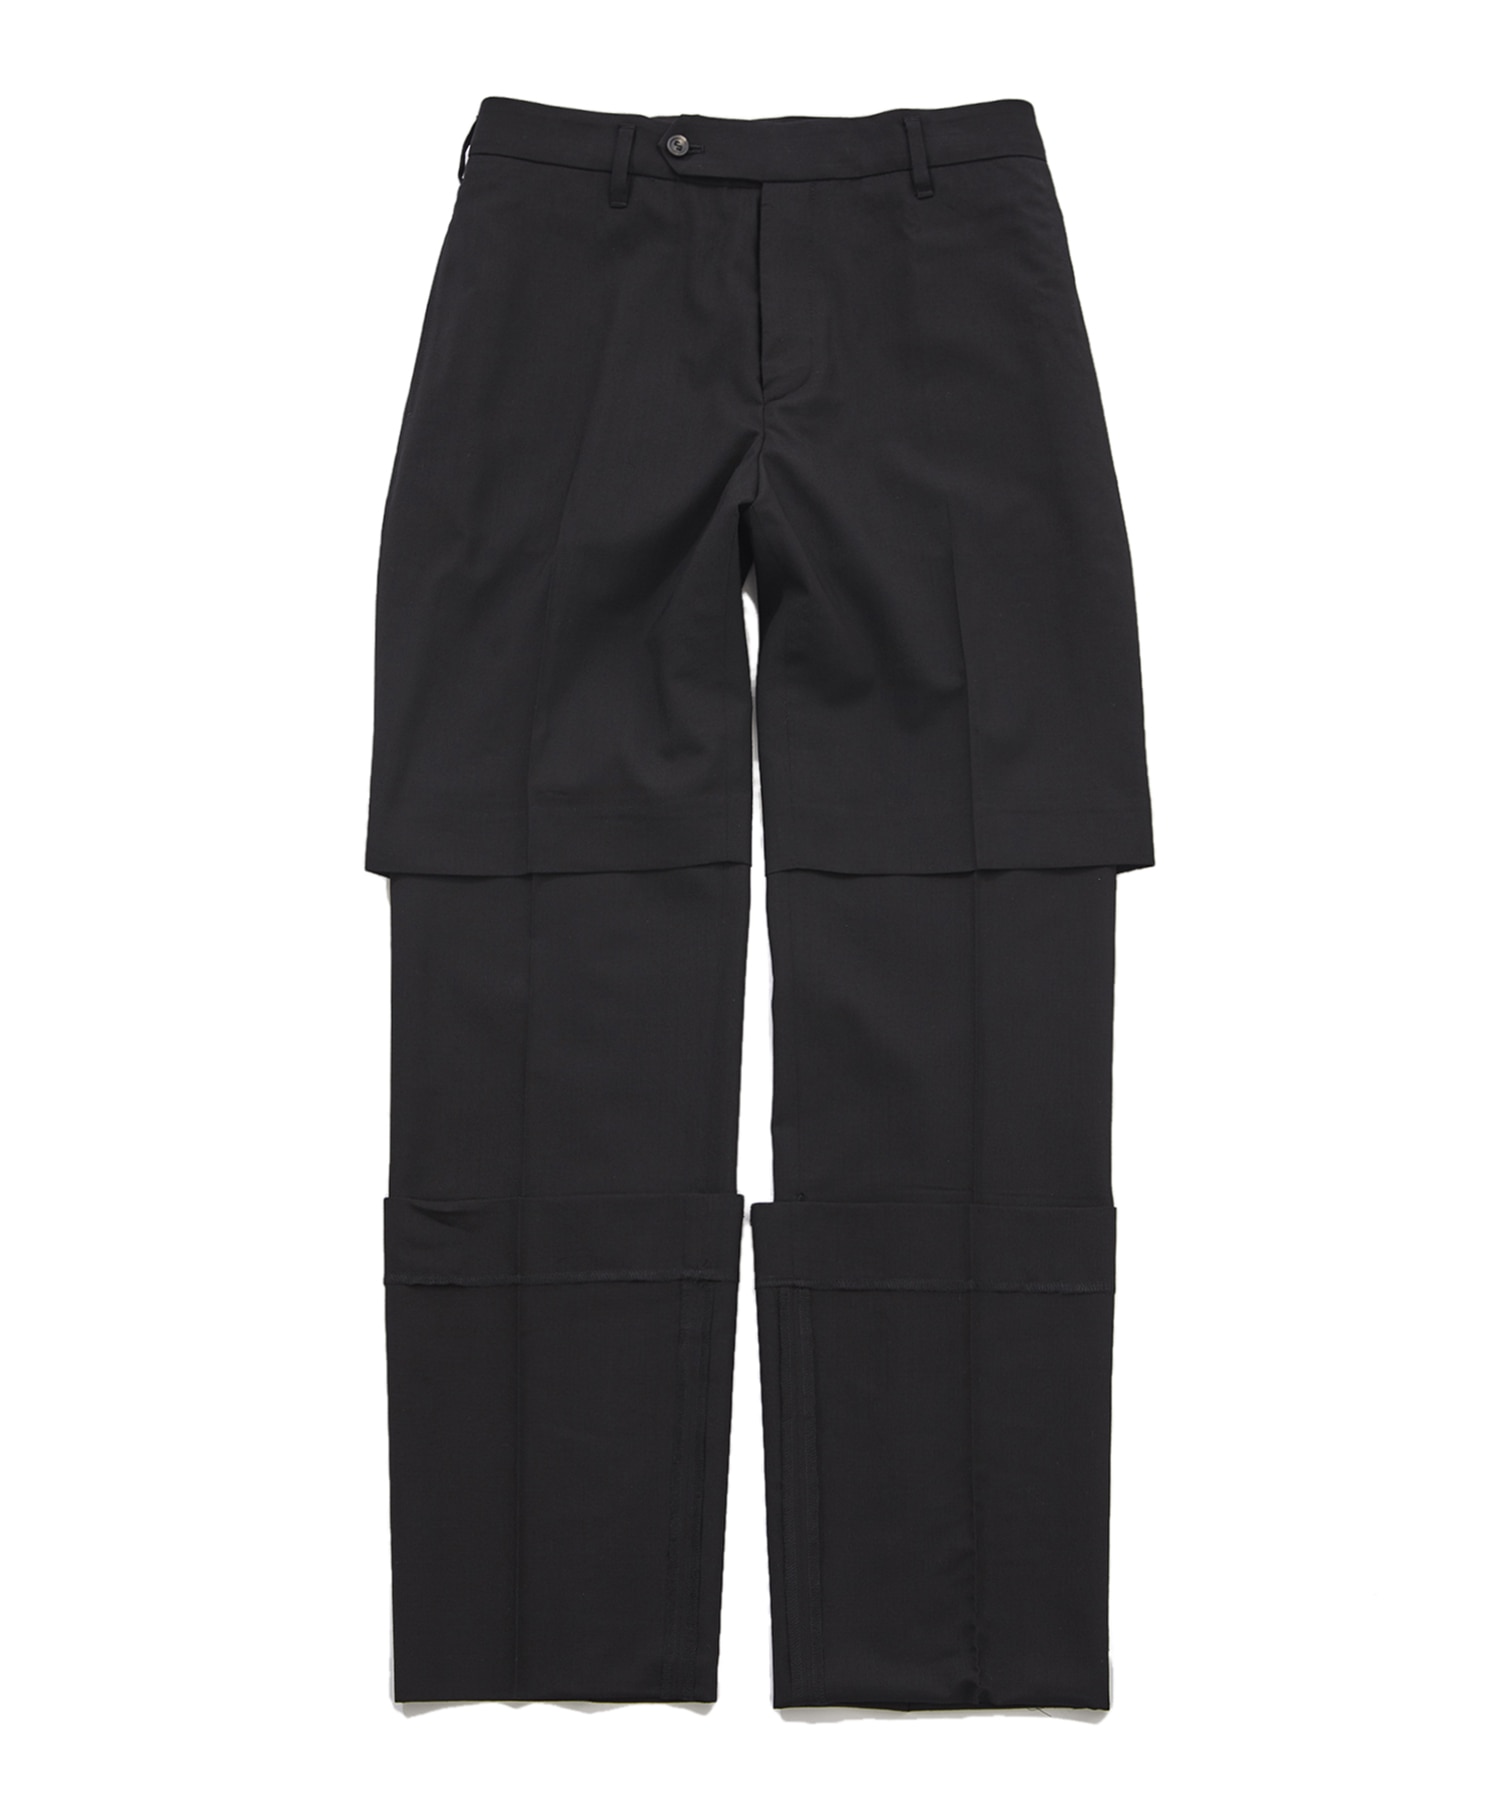 NOT LONG LAYERED TROUSERS